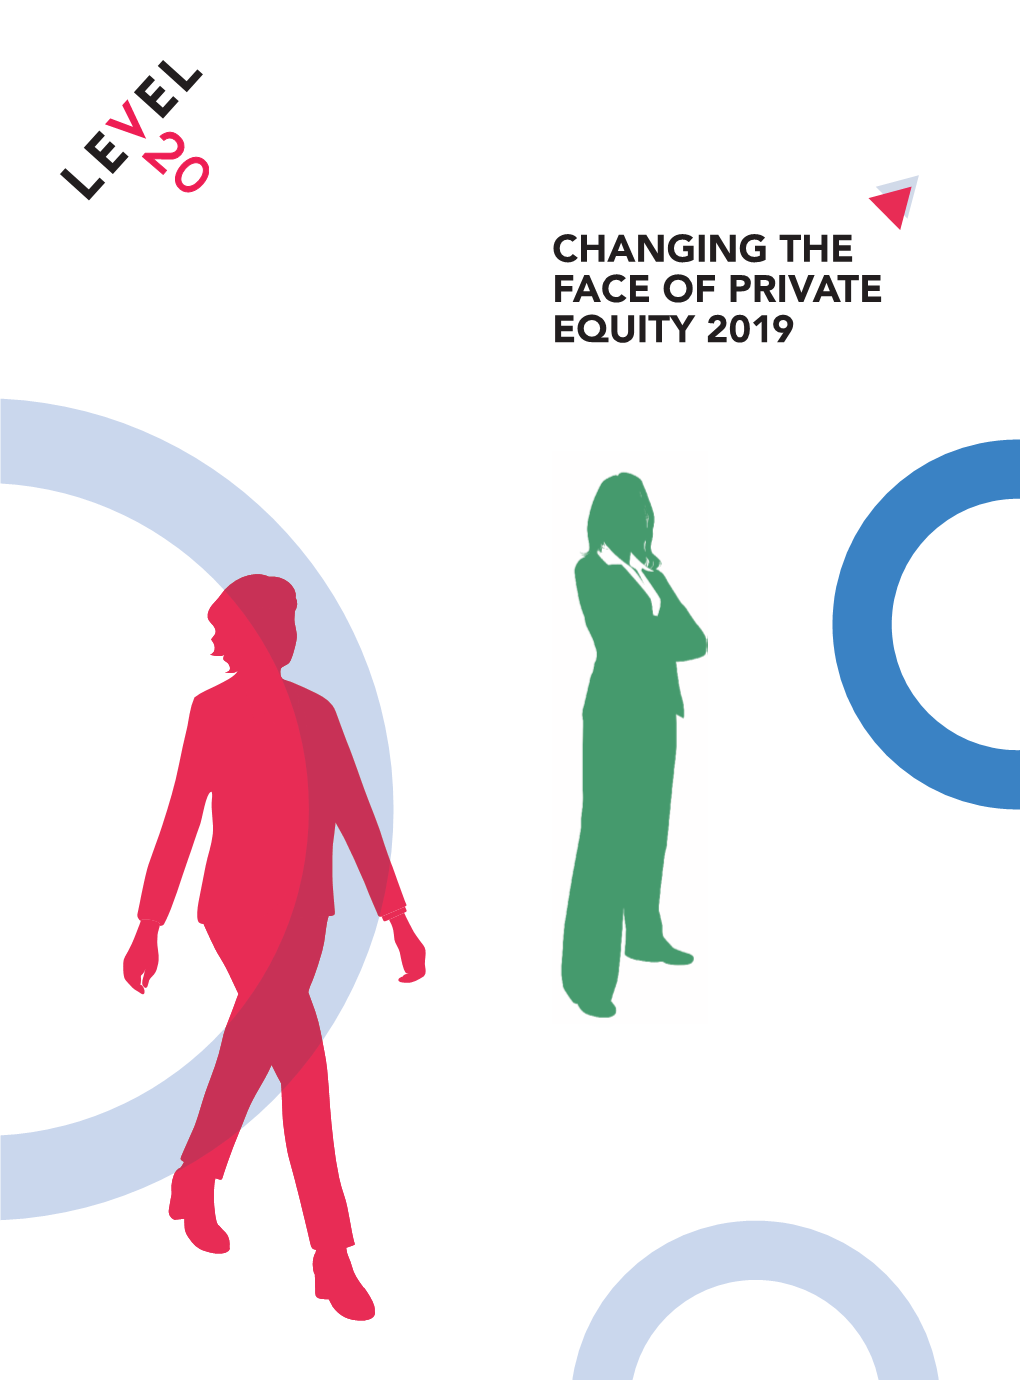 Changing the Face of Private Equity 2019